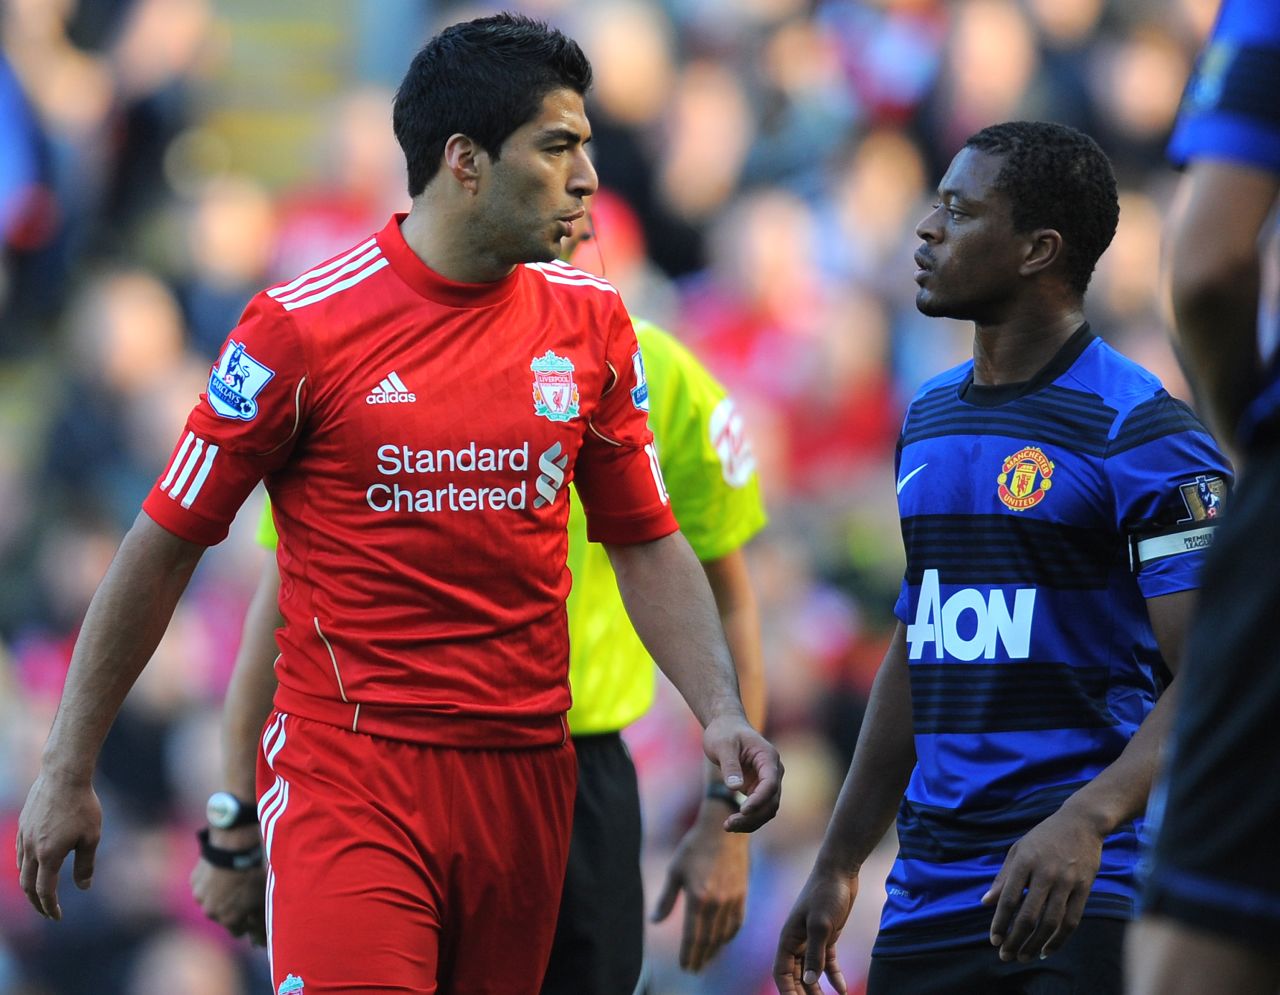 Liverpool striker Luis Suarez was handed an eight-match ban by the English Football Association for racially abusing Manchester United's Patrice Evra in a match in October 2011. Suarez refused to shake Evra's hand during the customary pre-match ritual ahead of the teams' clash on February 12 this year. The Uruguayan has since apologized for his snub of the France defender.